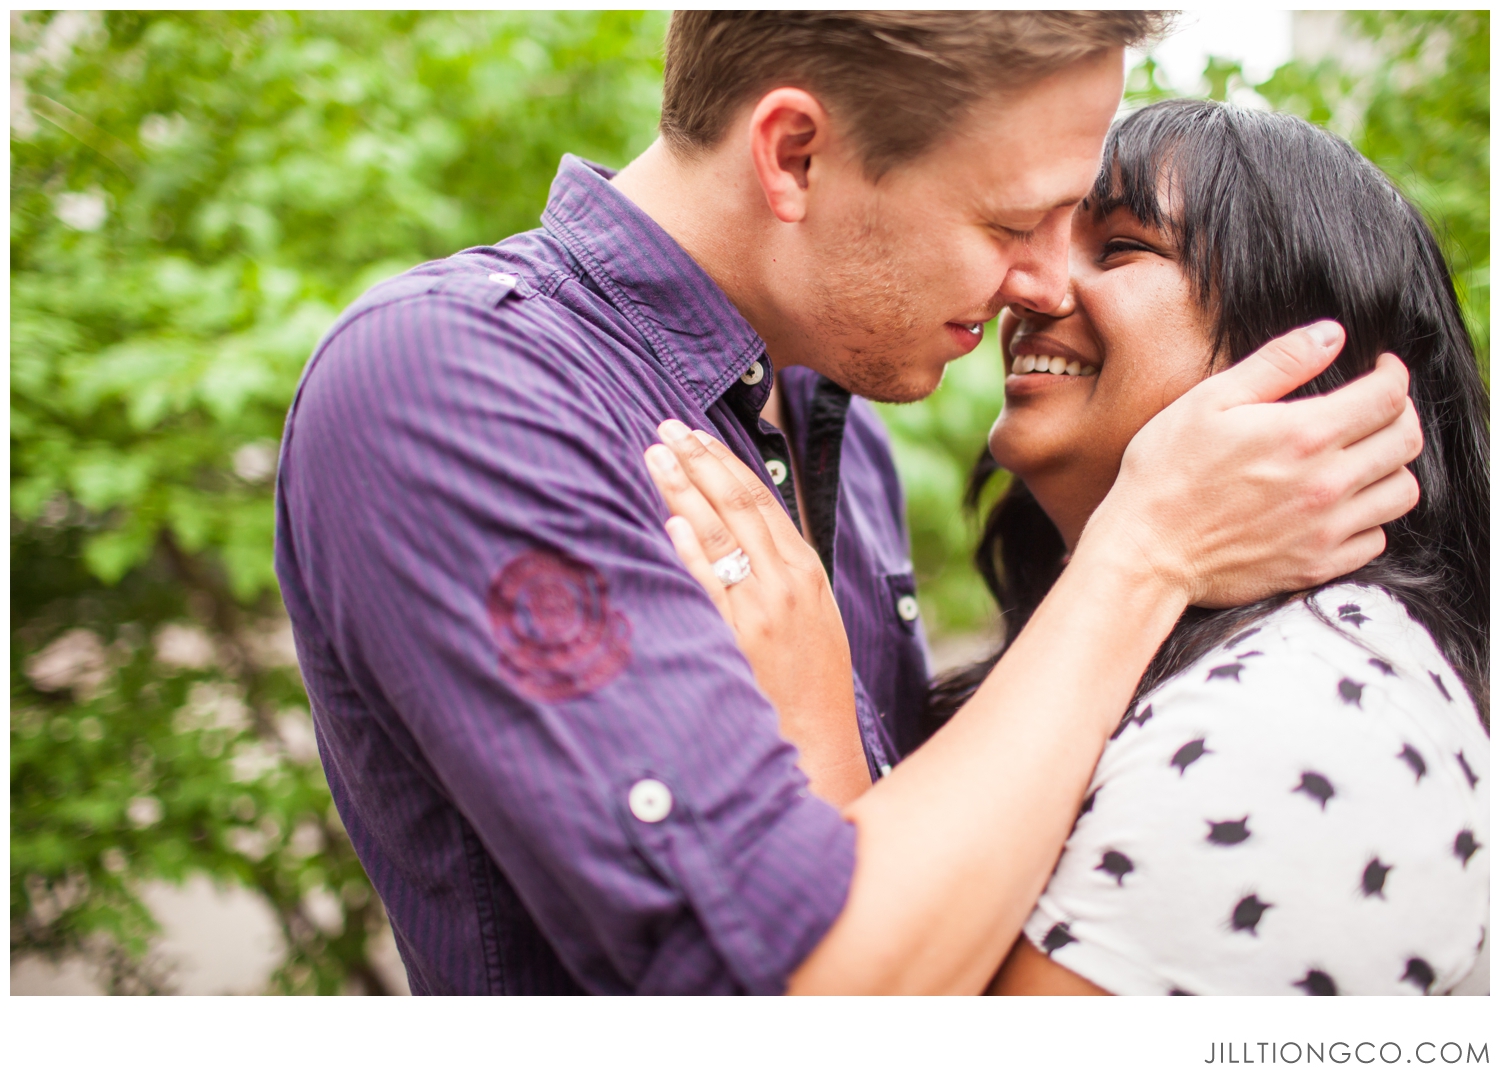 Jill Tiongco Photography | Engagement Session Ideas | Chicago Wedding Photographer